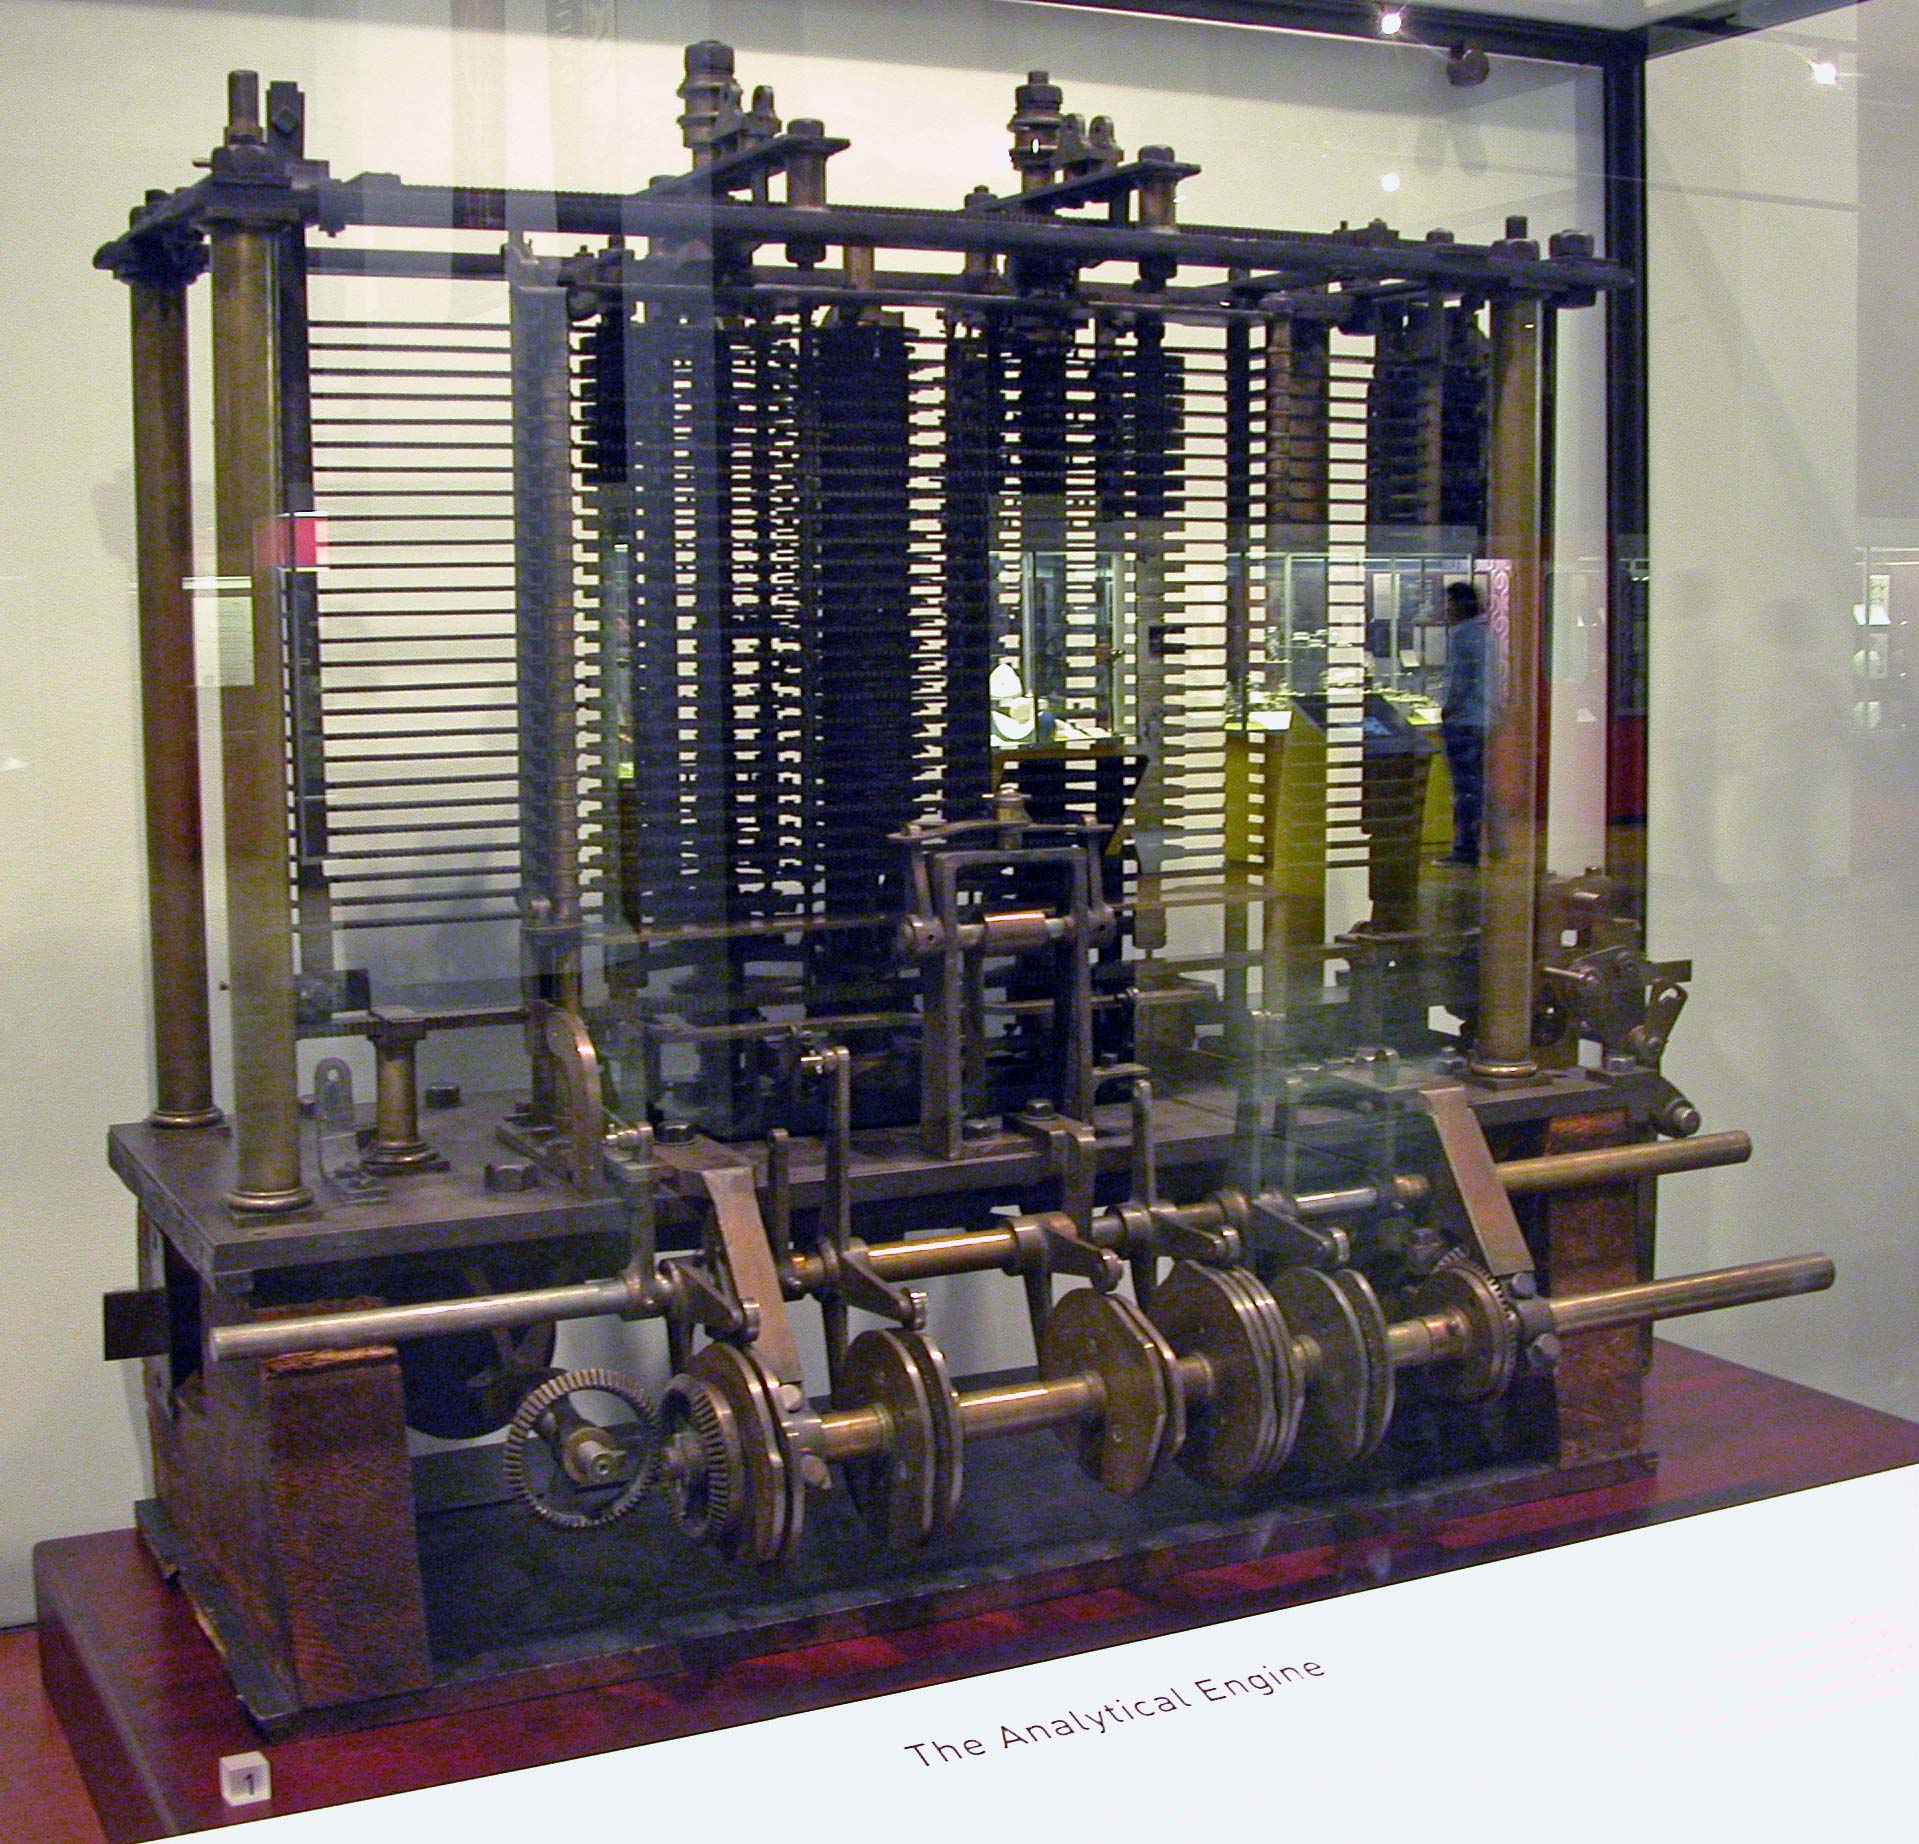 Partially constructed Analytical Engine on display at the London Science Museum